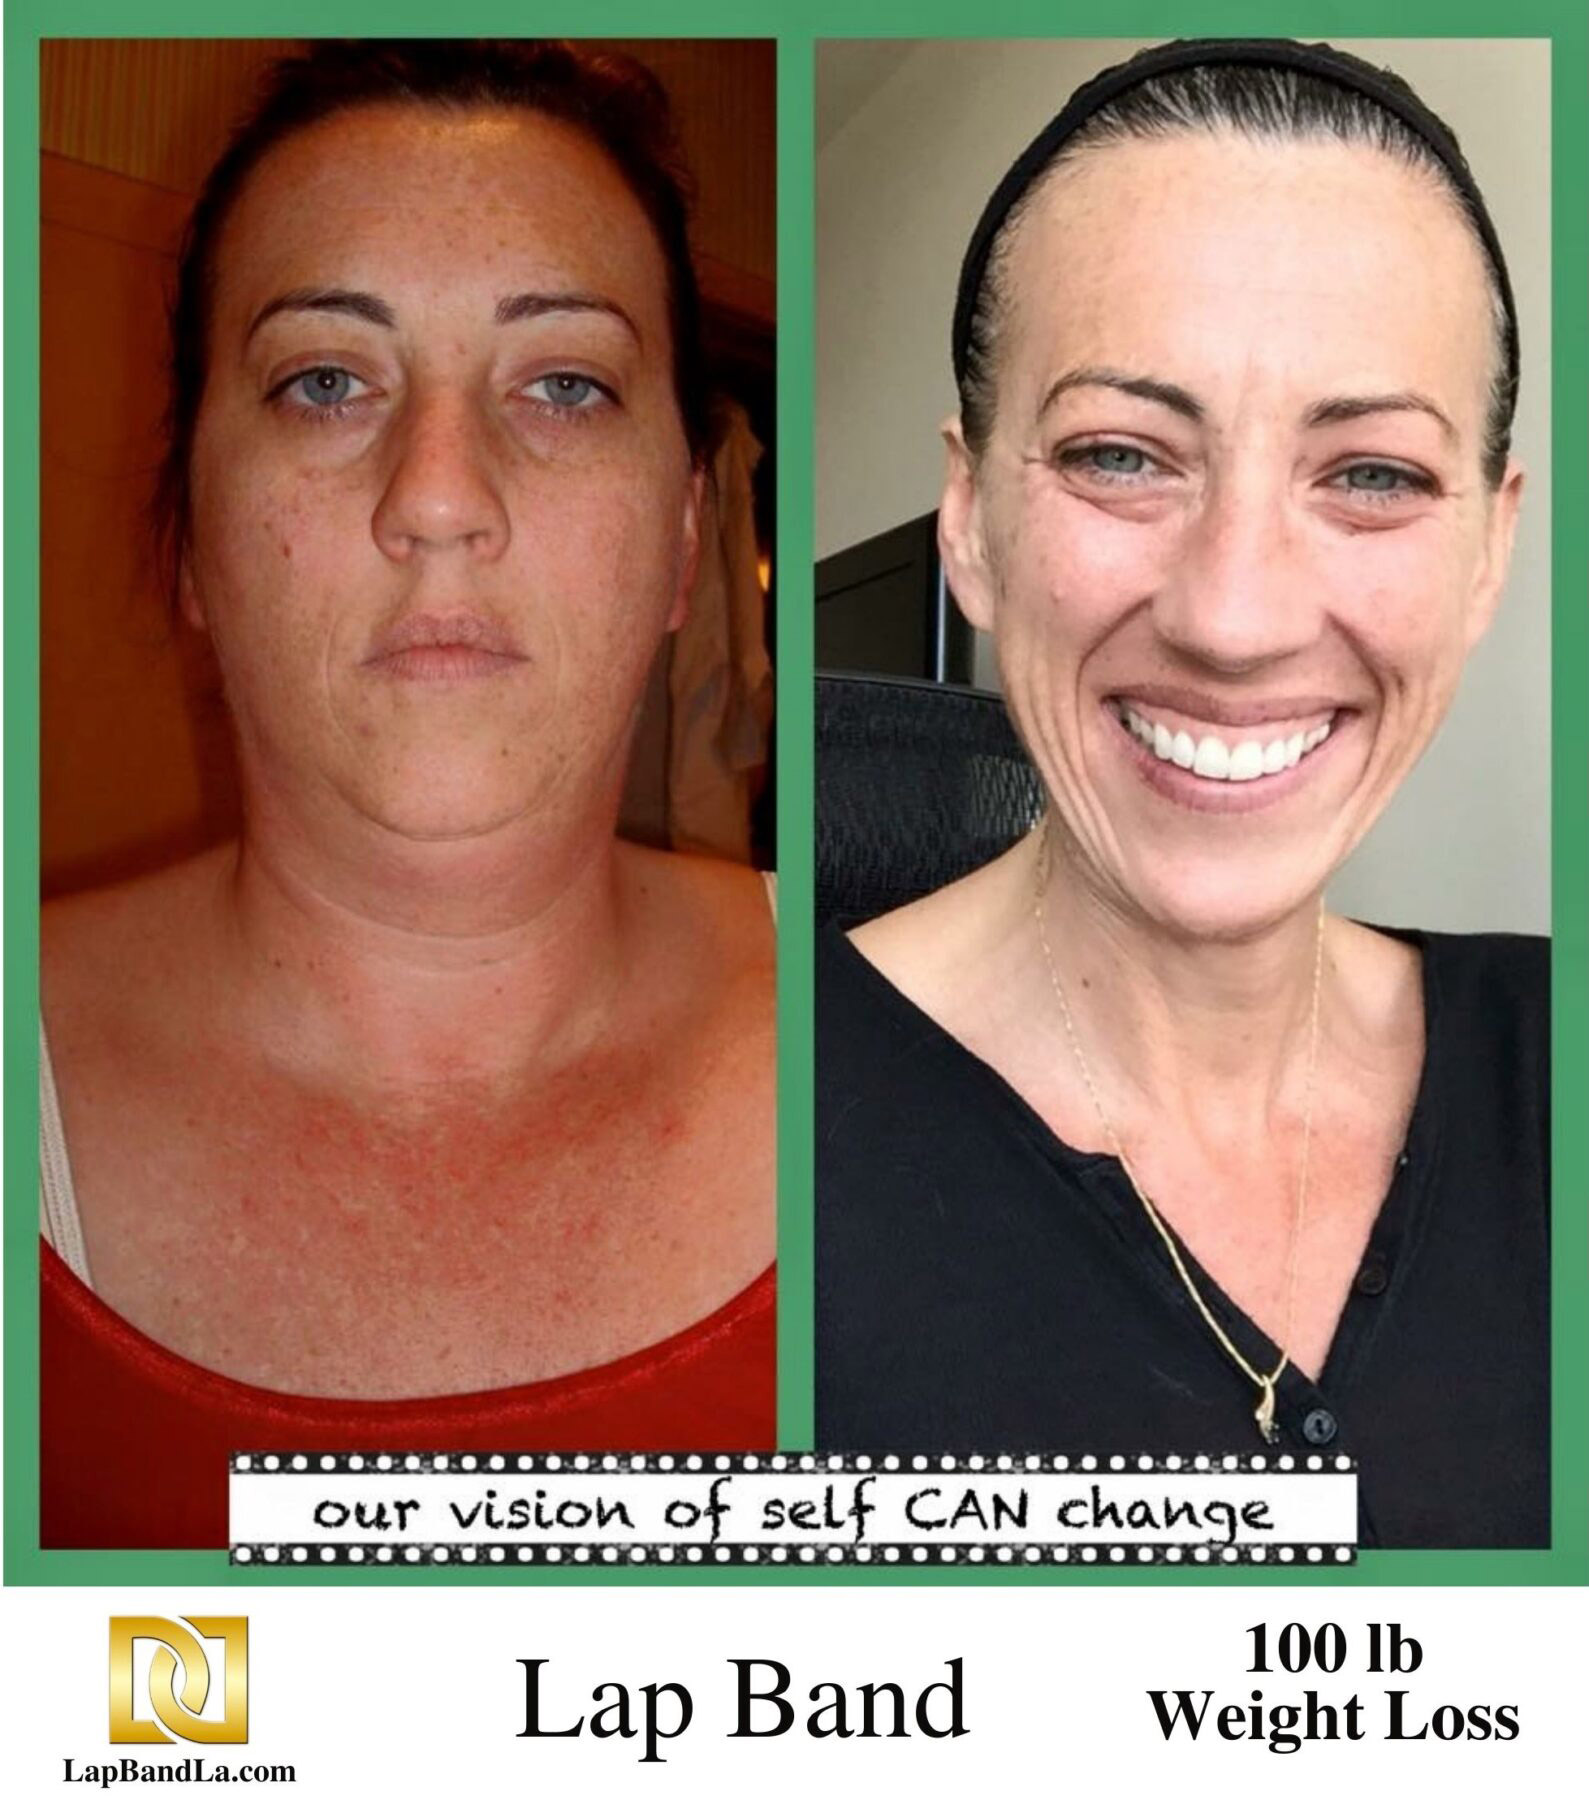 Dr Davtyan's lap band weight loss surgery female patient before and after